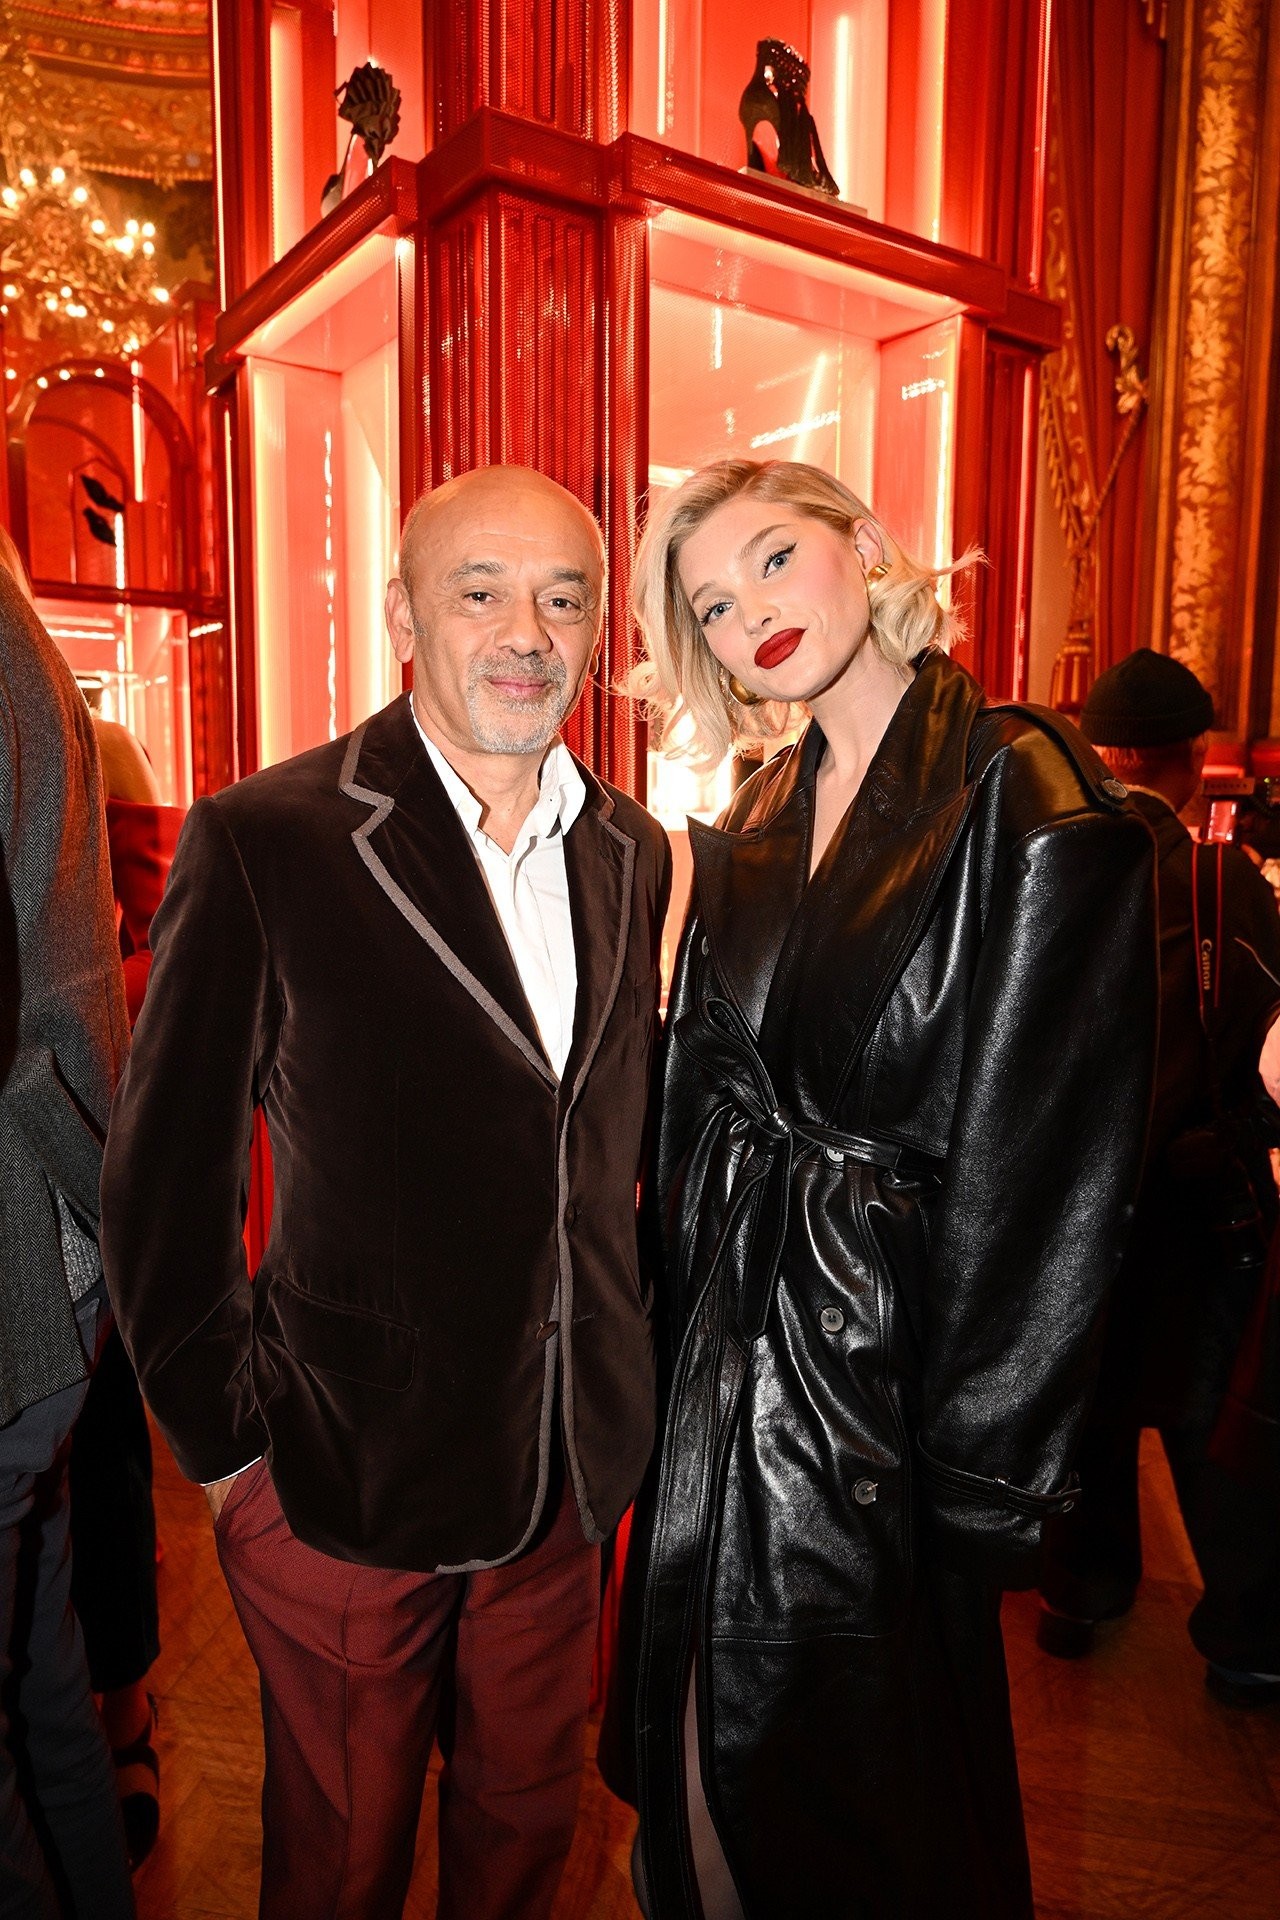 elsa-hosk-and-christian-louboutin-at-the-loubi-show-getty-images-2.jpg